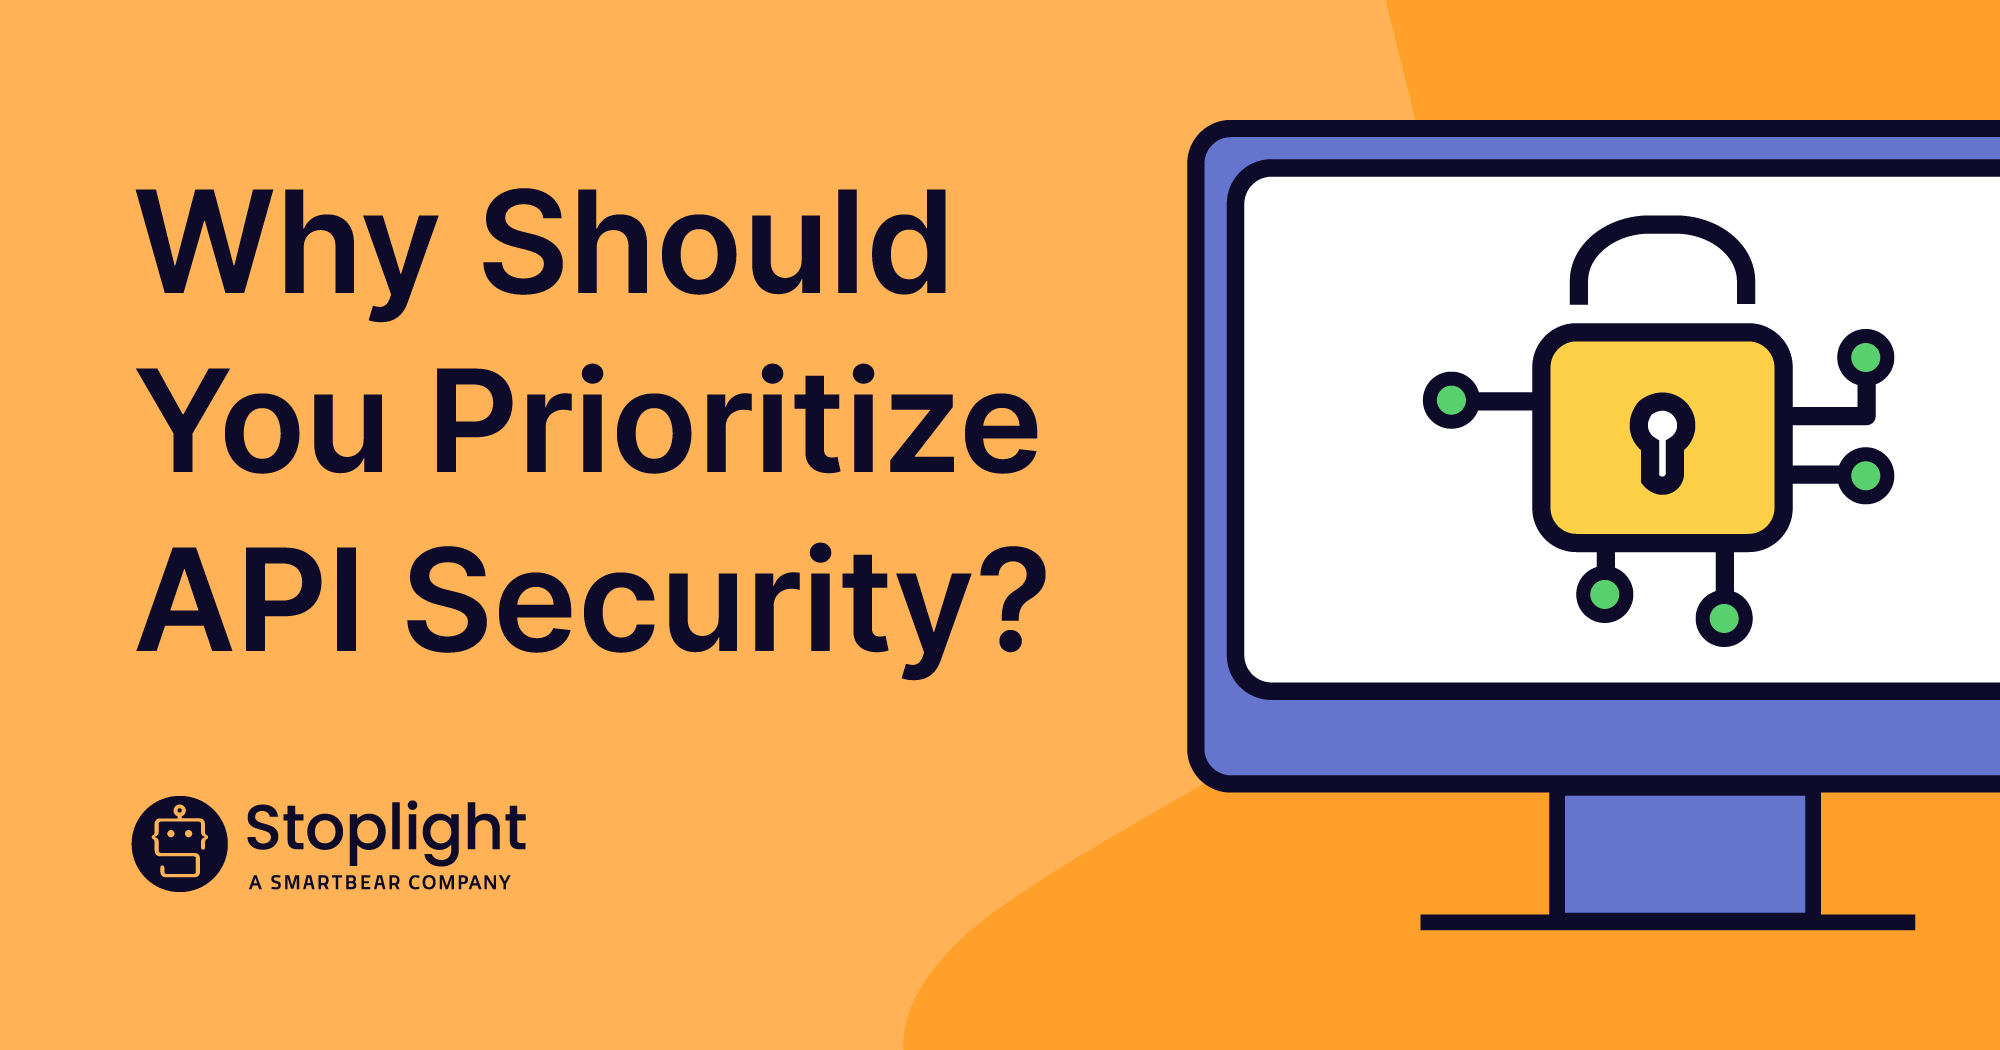 Why Should You Prioritize API Security?